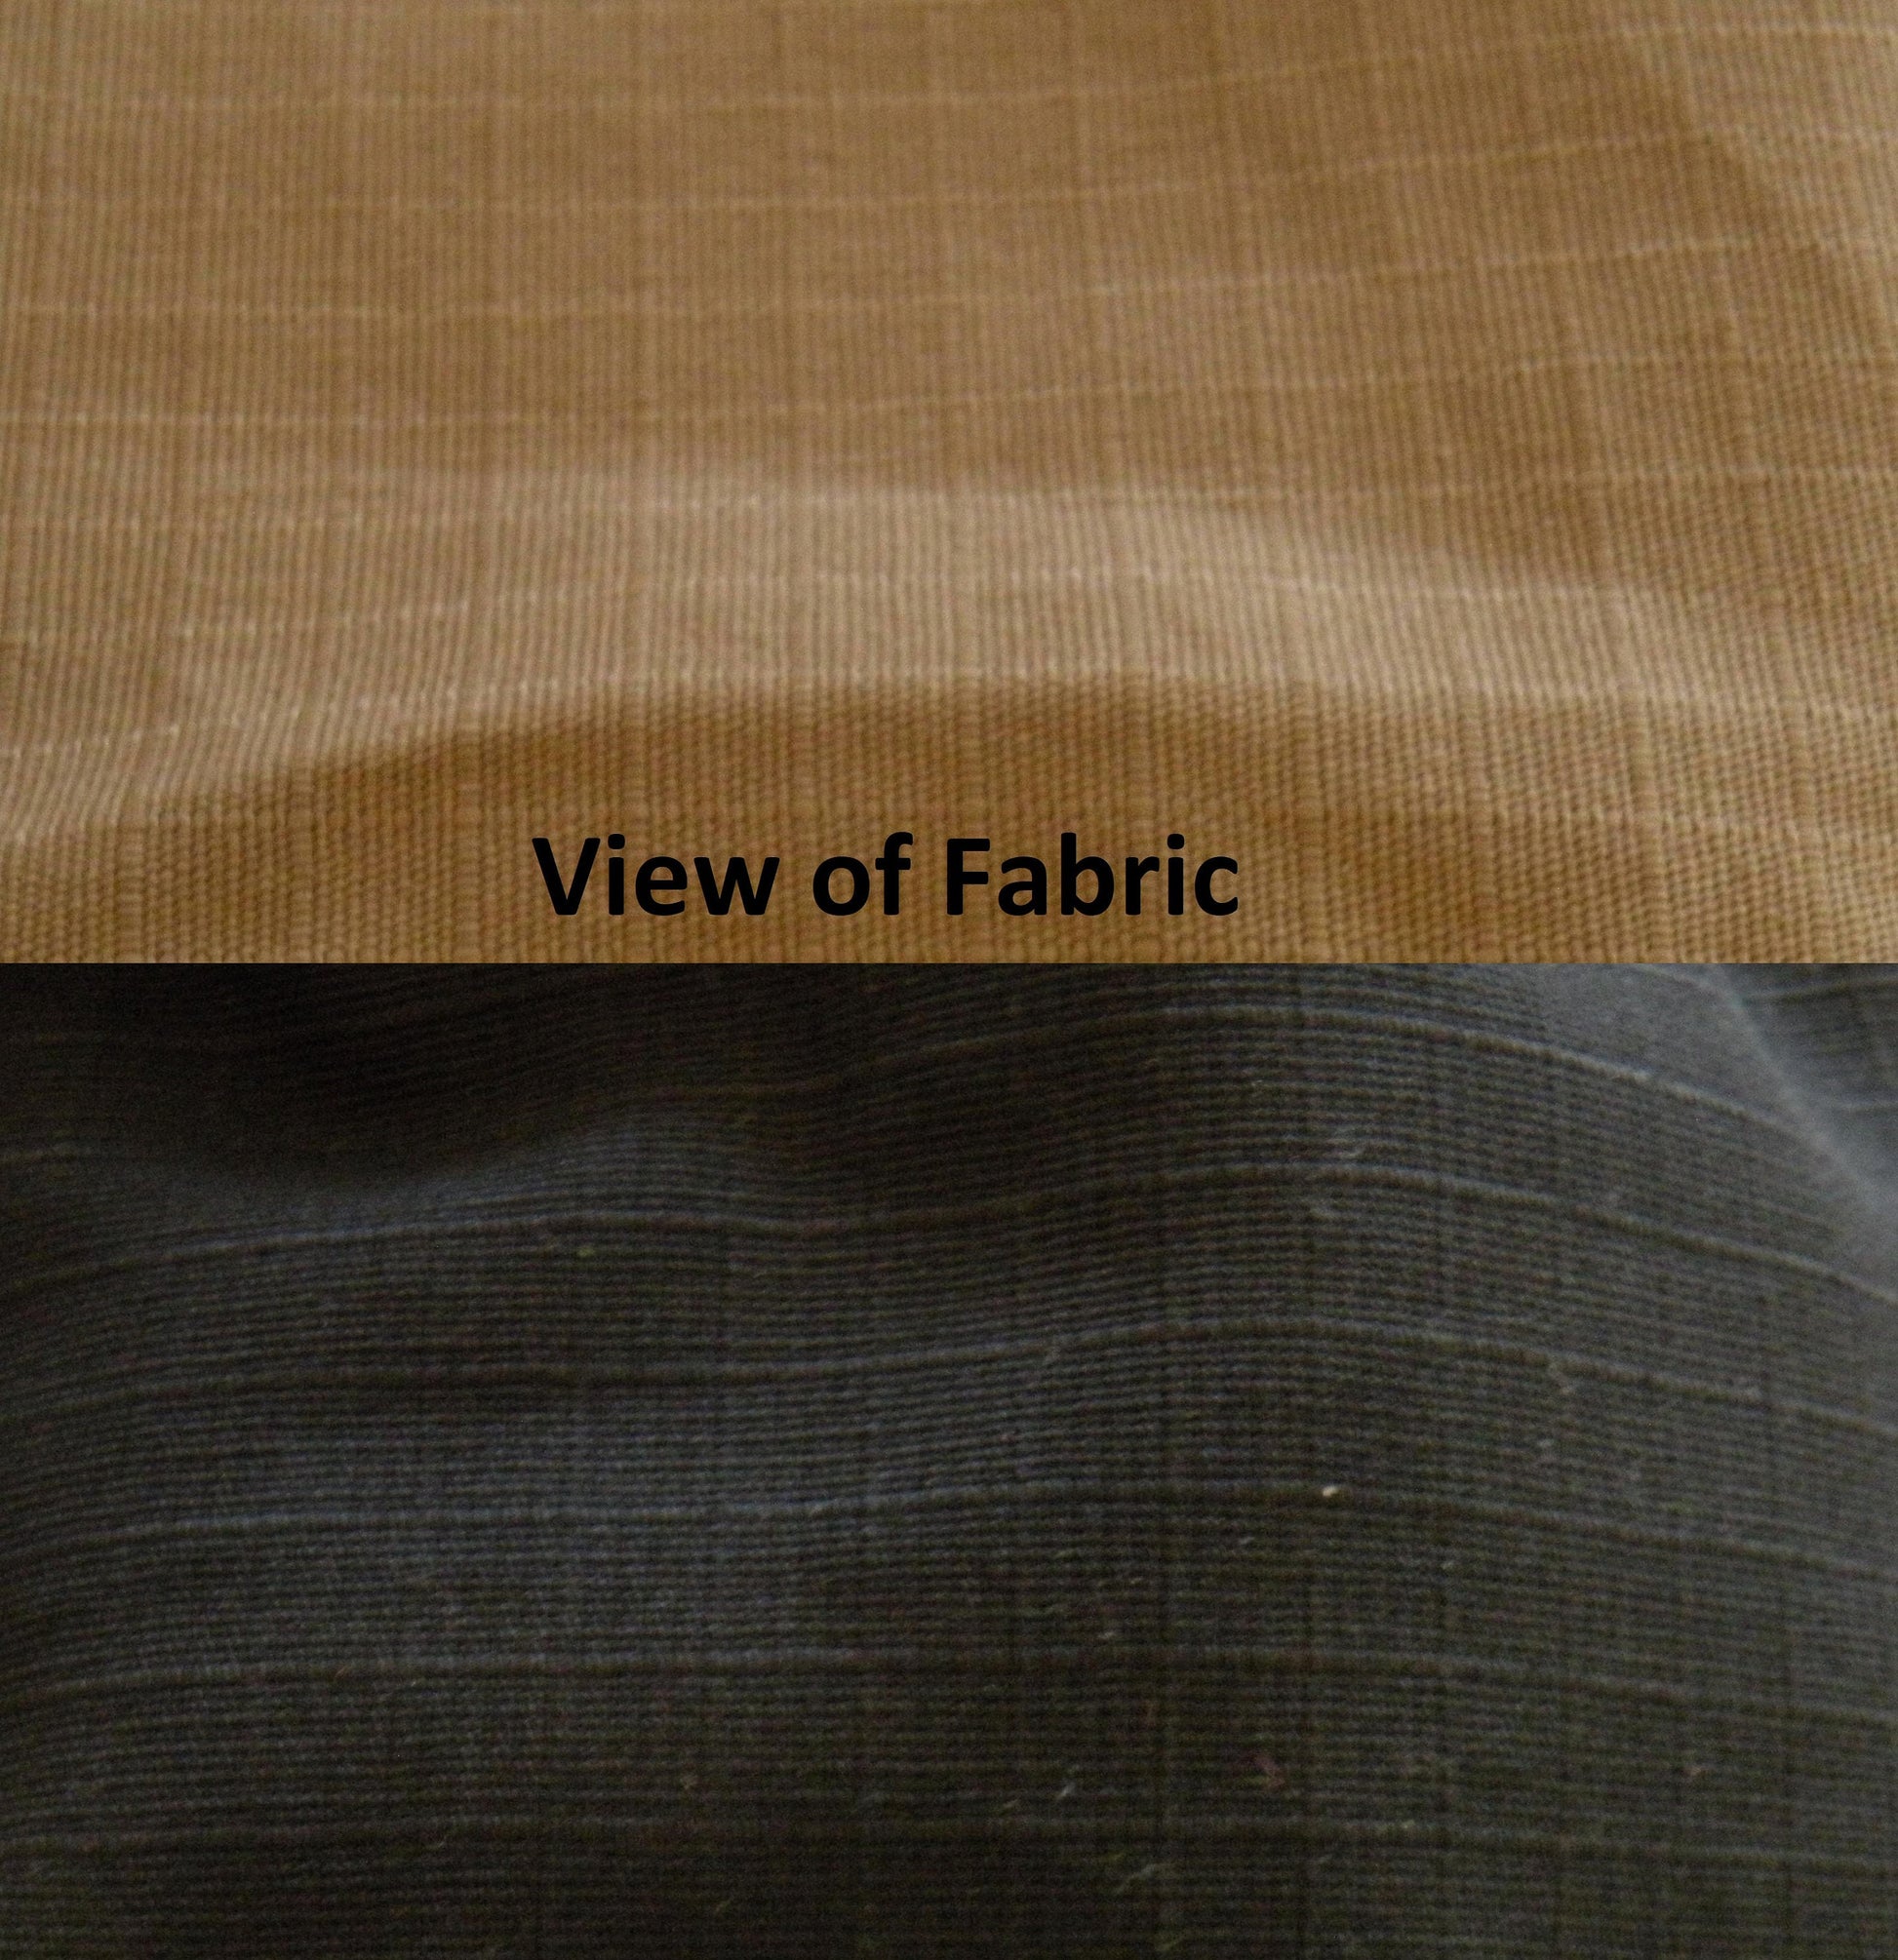 fabric color tan and black 100% cotton ripstop